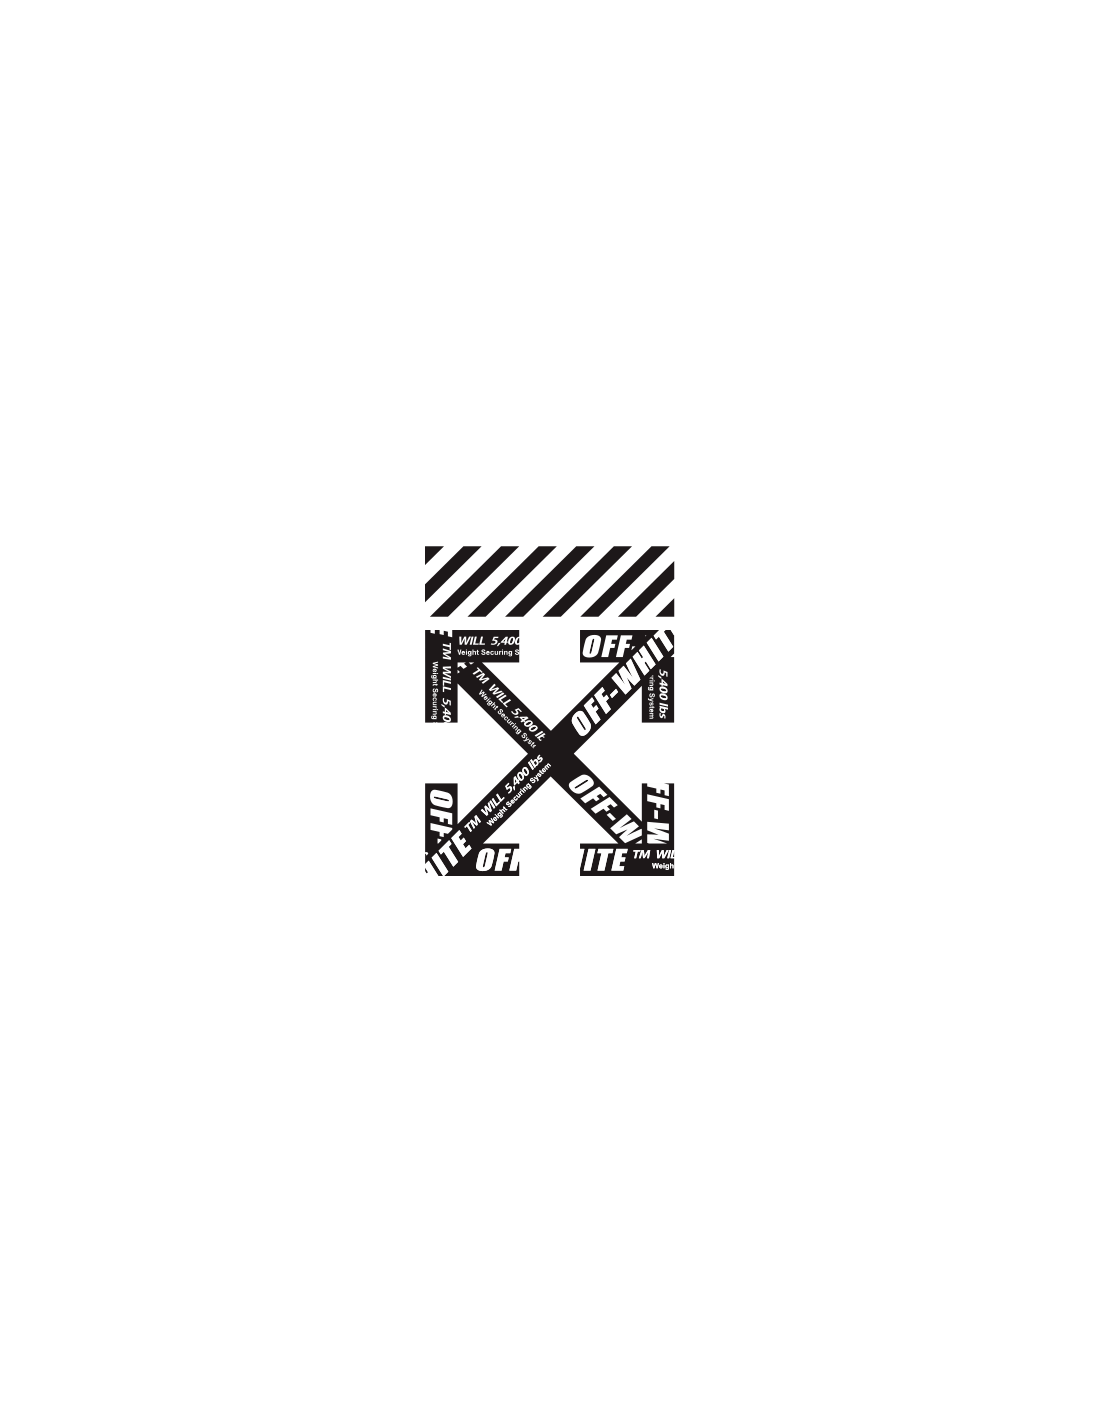 Off White Logo - Off White Logo Sticker PNG Image With Transparent